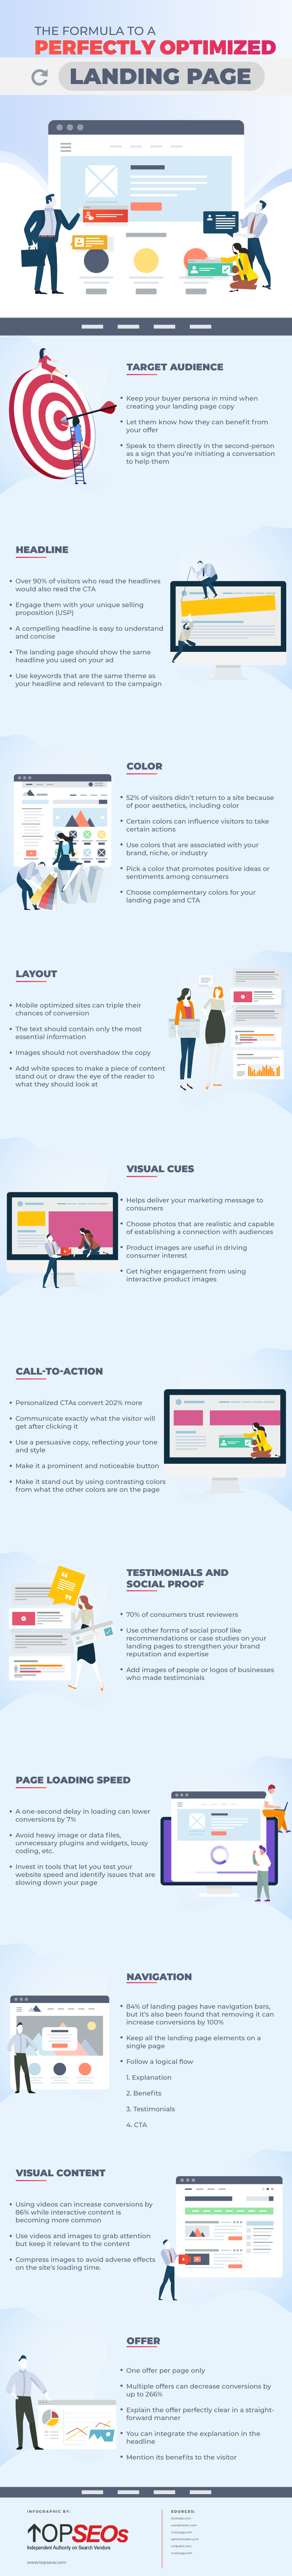 The Formula to a Perfectly Optimized Landing Page Infographic